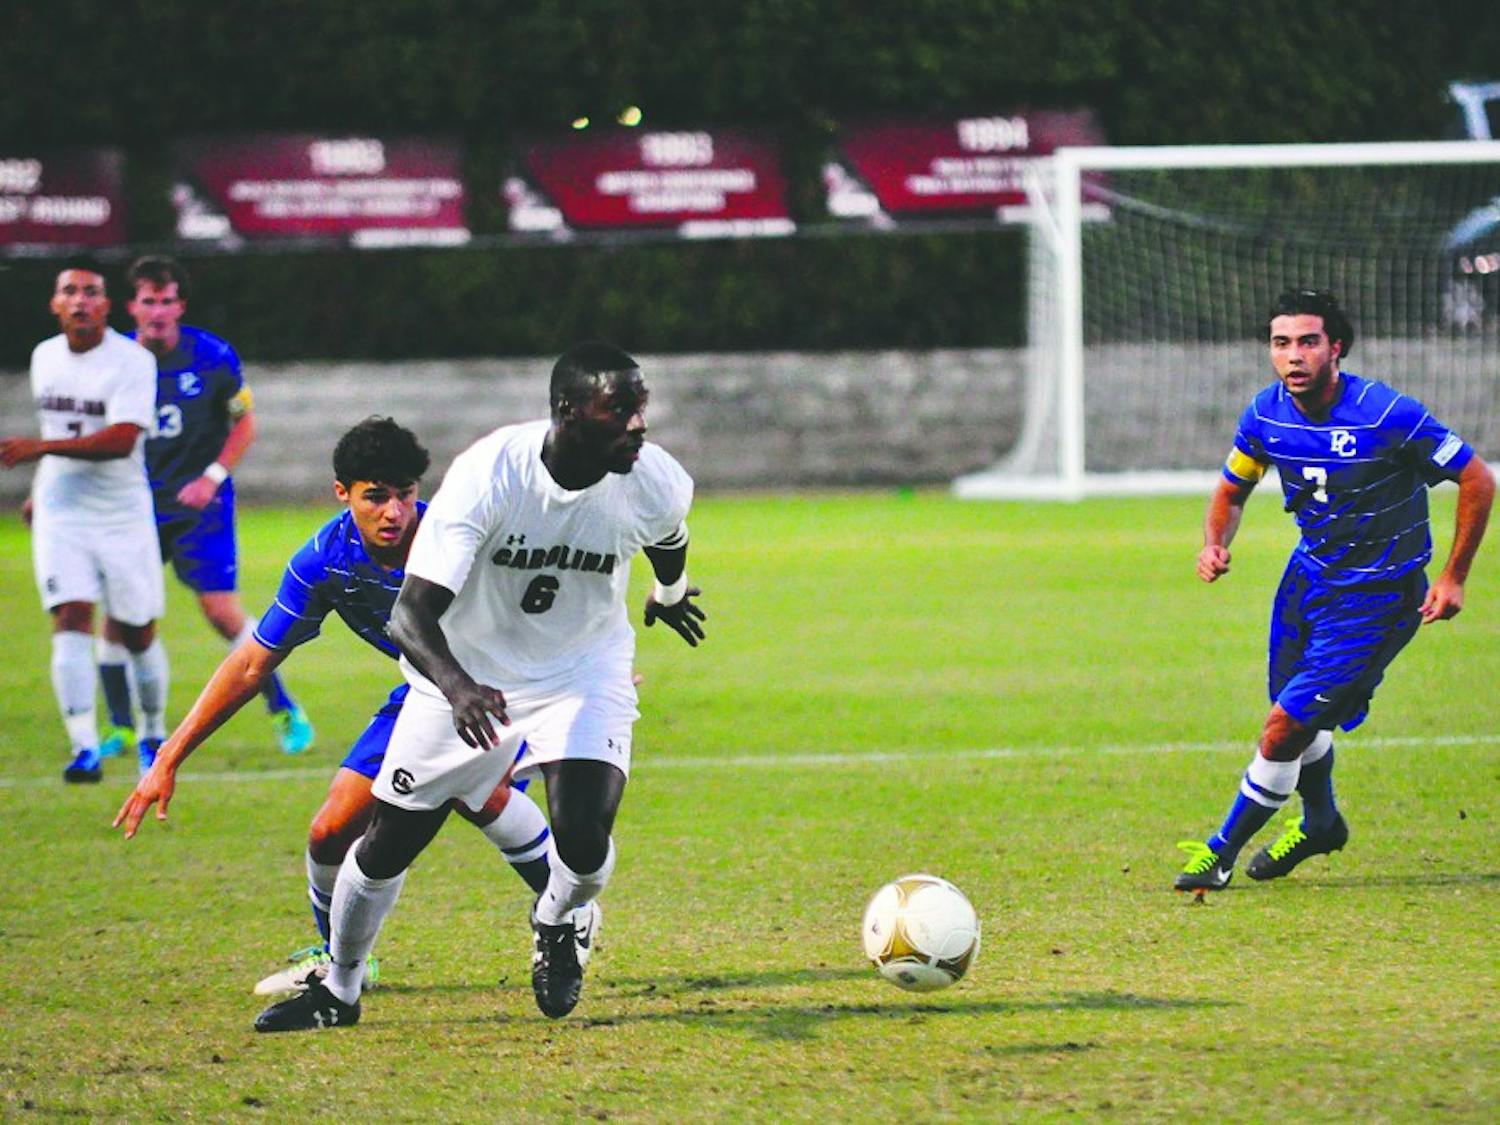 	Senior defender Mahamoudou Kaba scored the opening goal in South Carolina’s win over Mercer en route to a 2-0 victory that keeps the Gamecocks unbeaten.